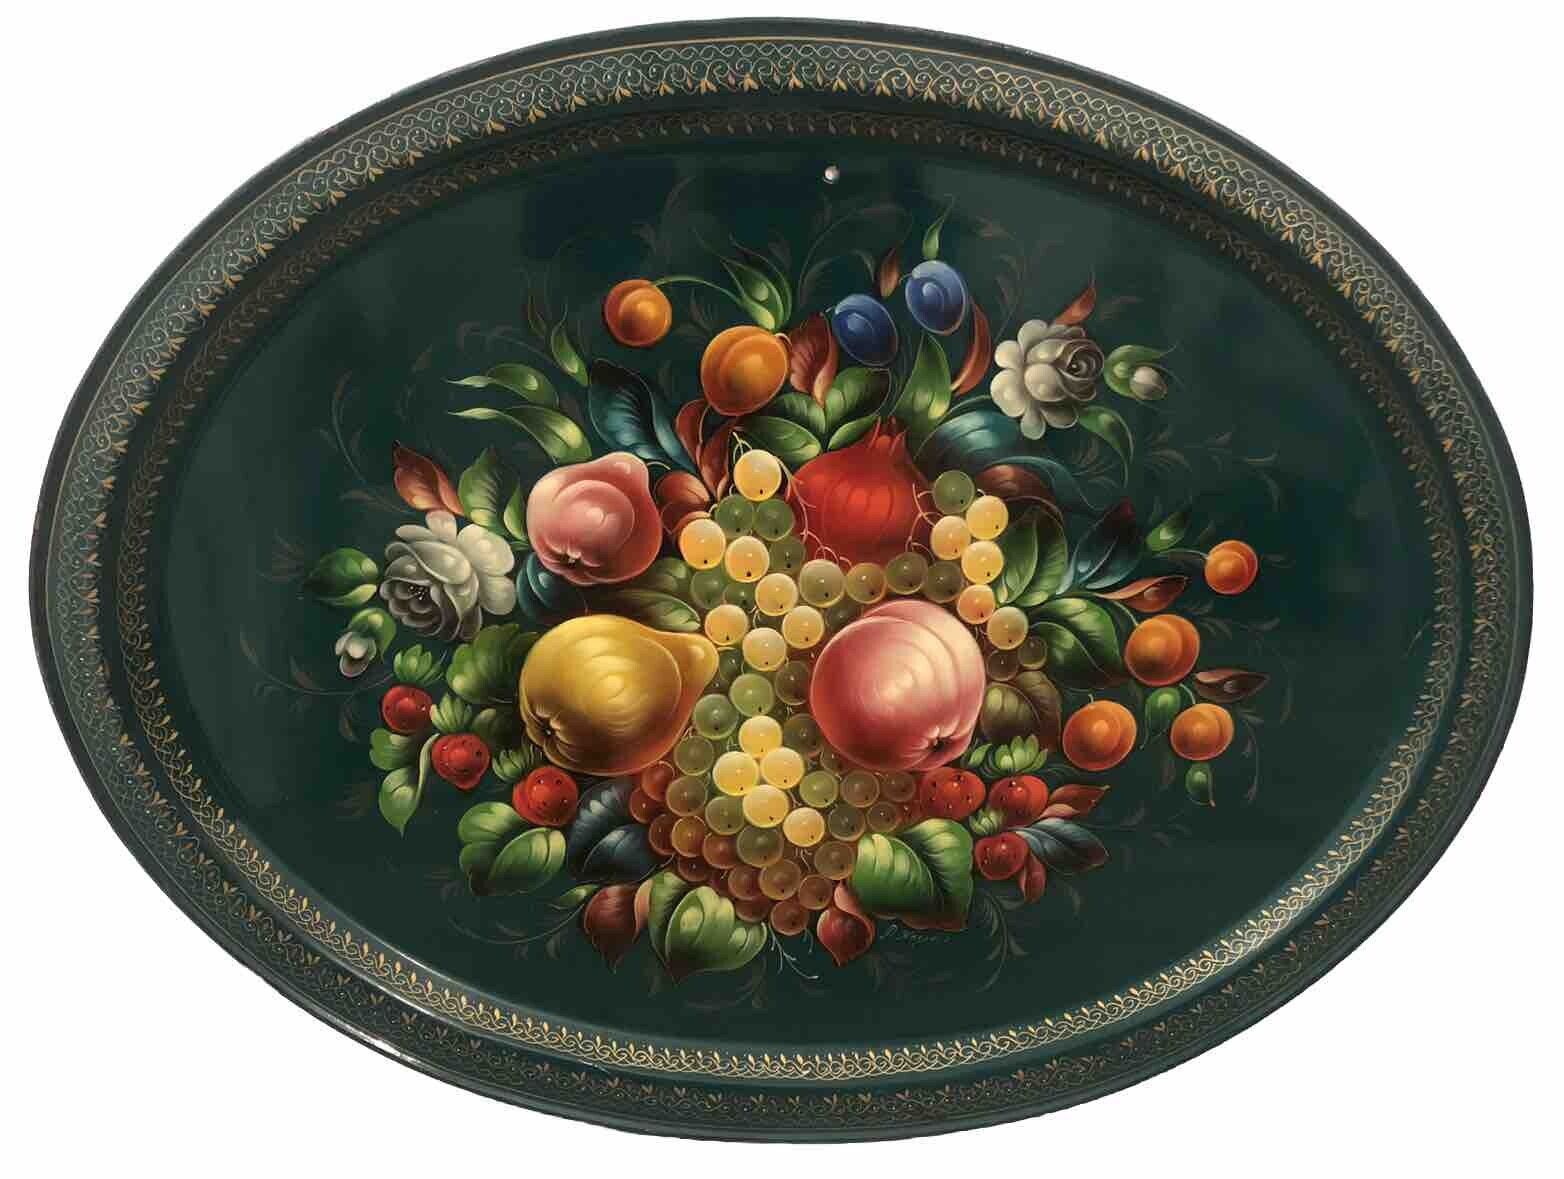 XXL Vintage Zhostovo Russian Toleware Tray, 26”x21”, Fruits Floral Handpainted